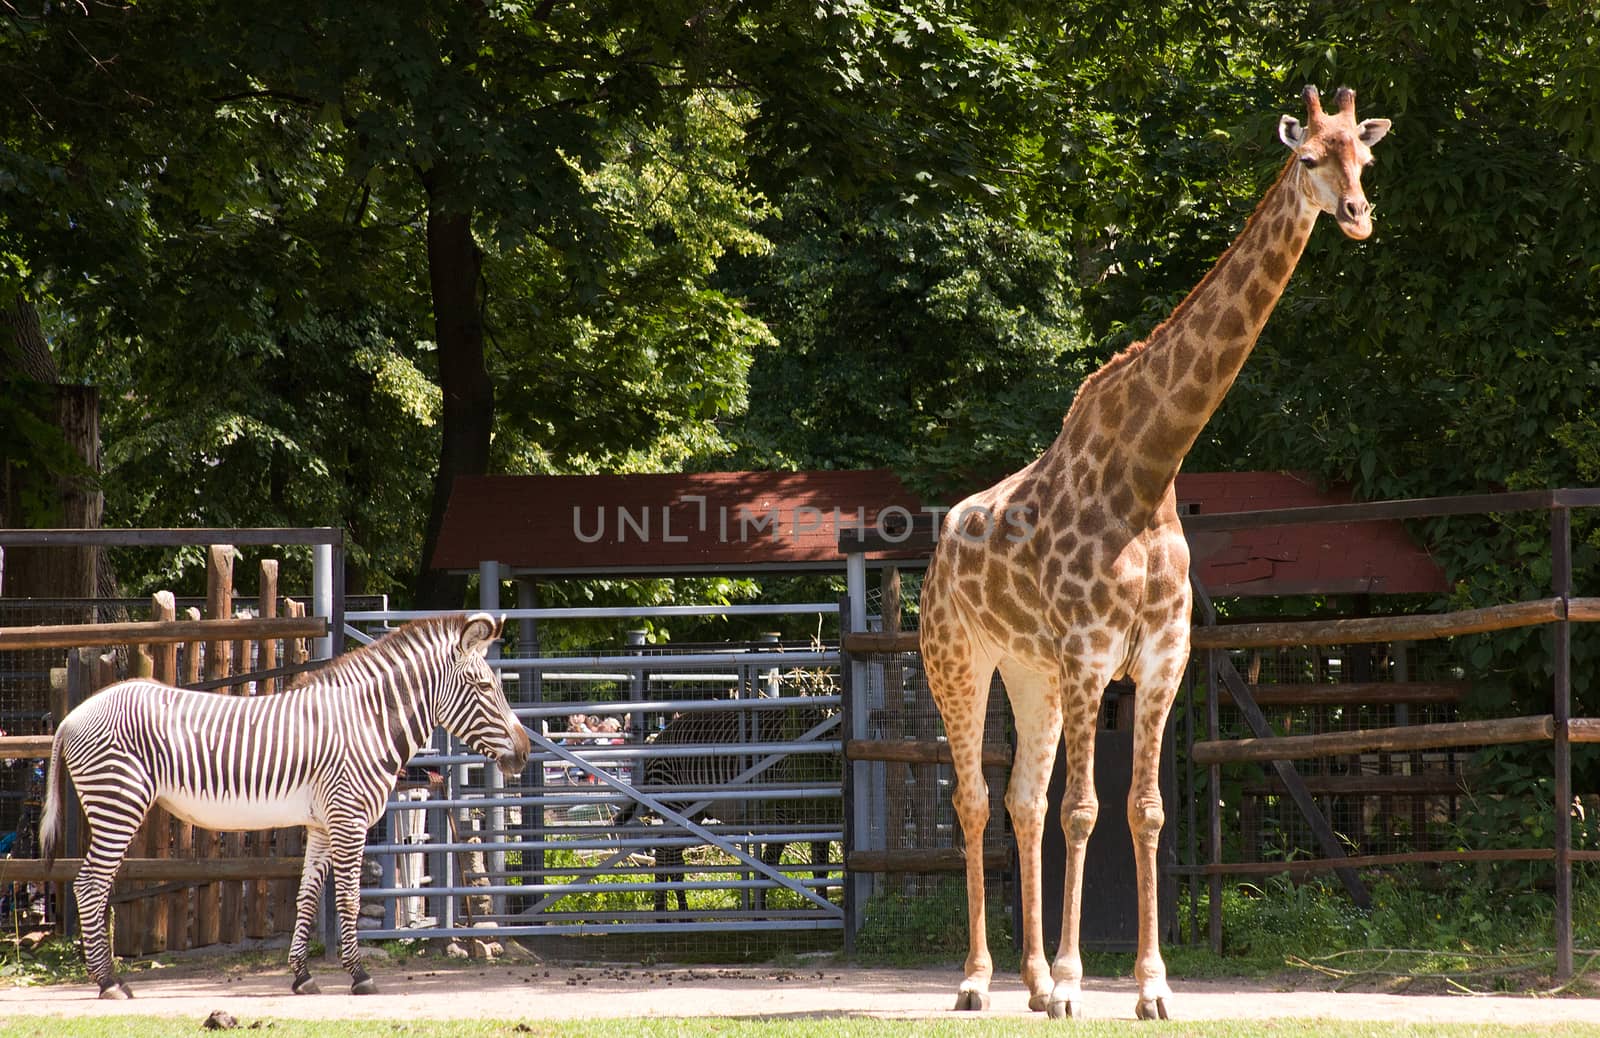 Animals at the Moscow zoo, zebra and giraffe